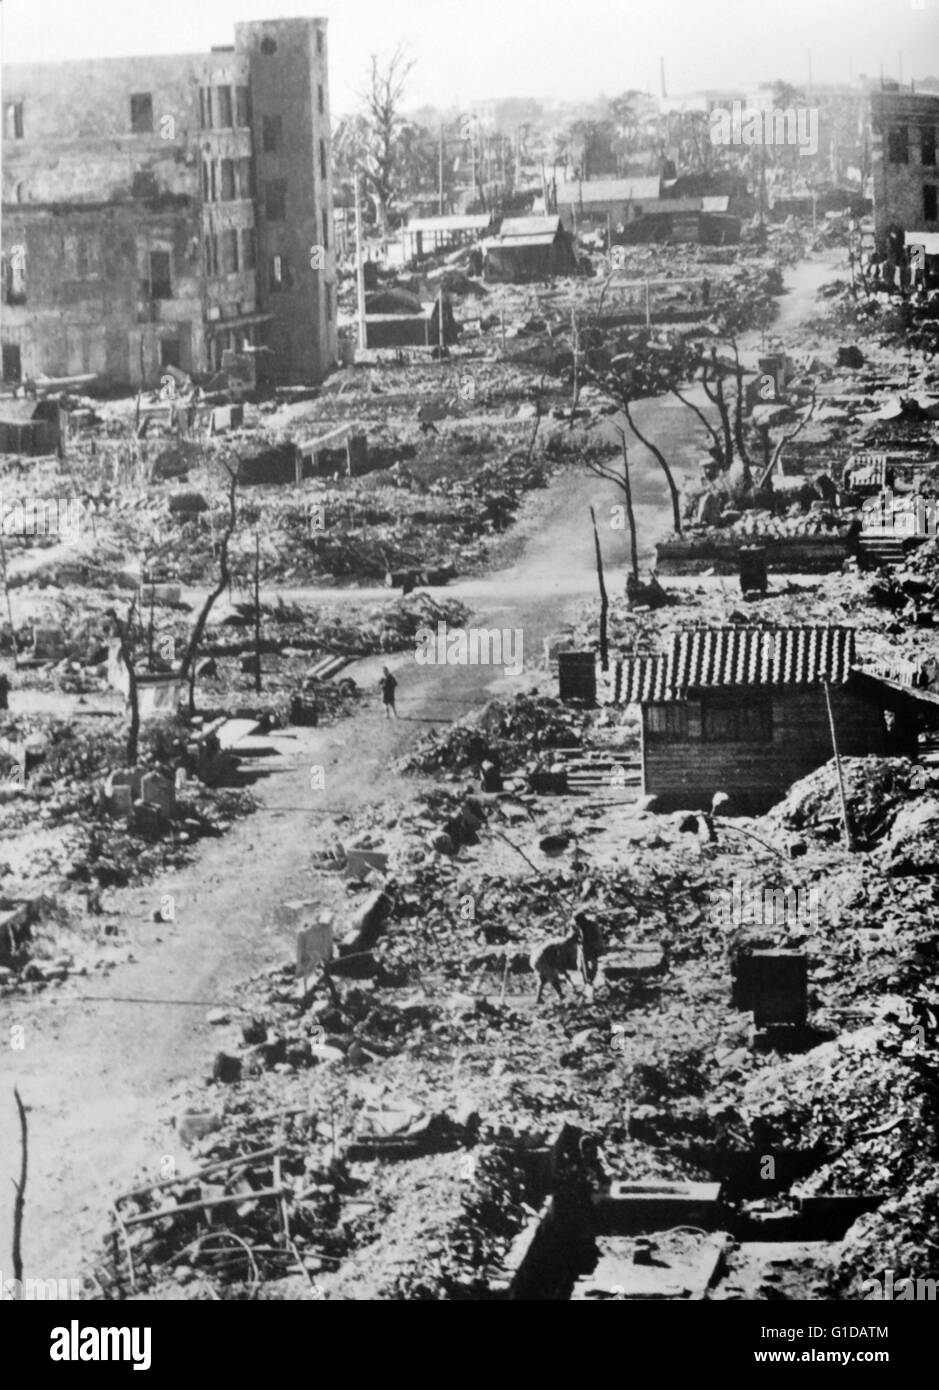 The ruins of Tokyo after the Allied bombing during the nights of the 9th and 10th March 1945. During the raids 279 aircraft launched 1665 tonnes of incendiary projectiles at the city. Stock Photo